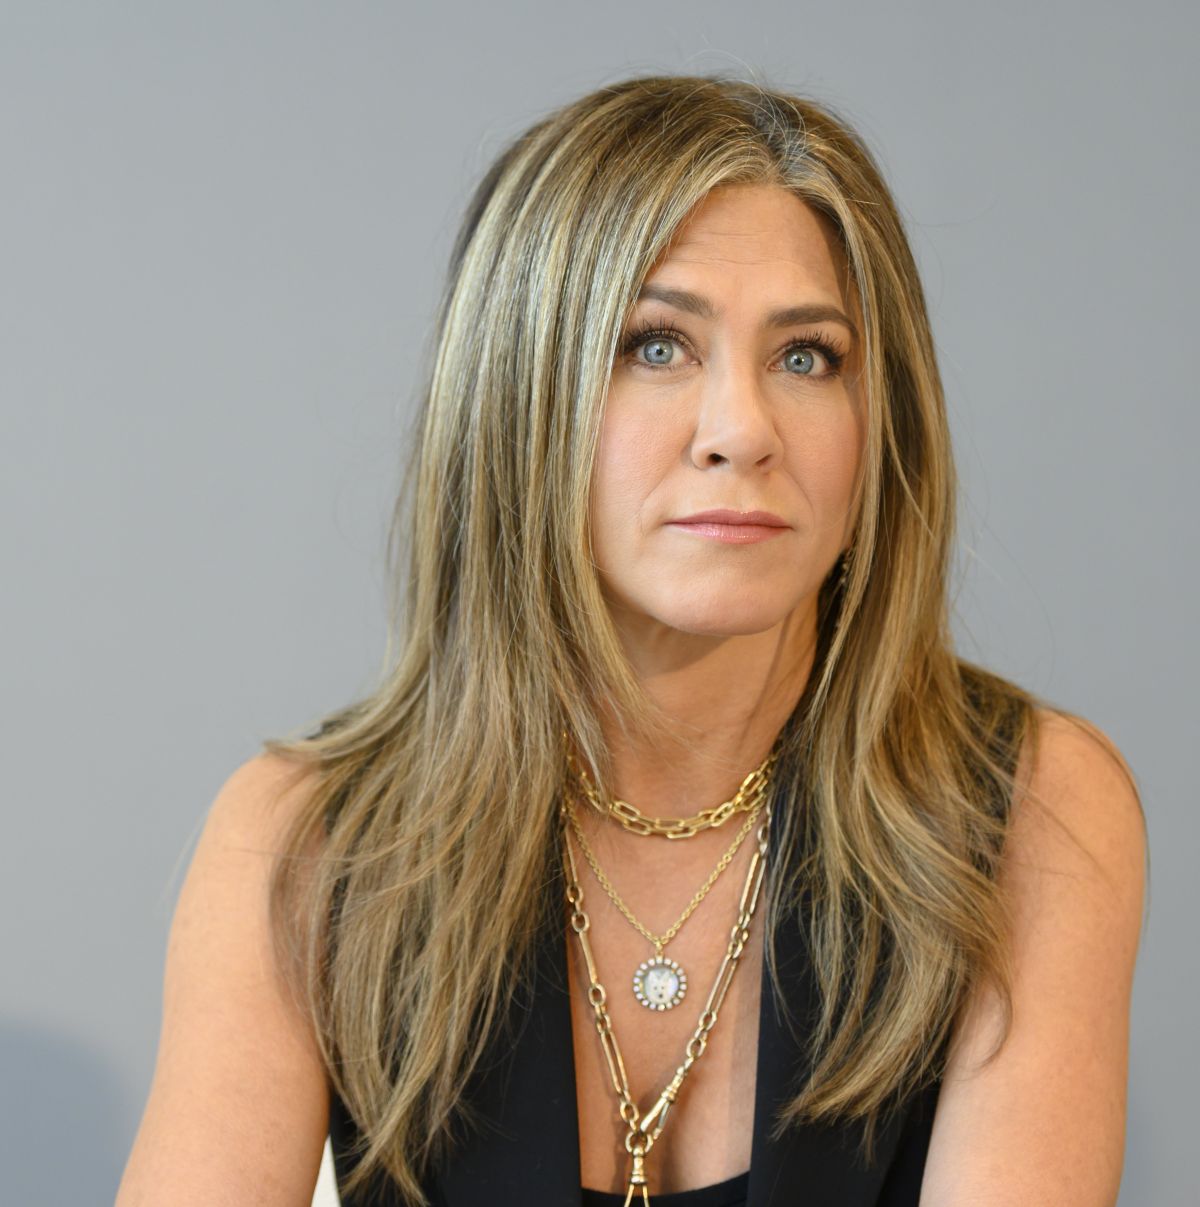 List 101+ Images recent pictures of jennifer aniston Updated